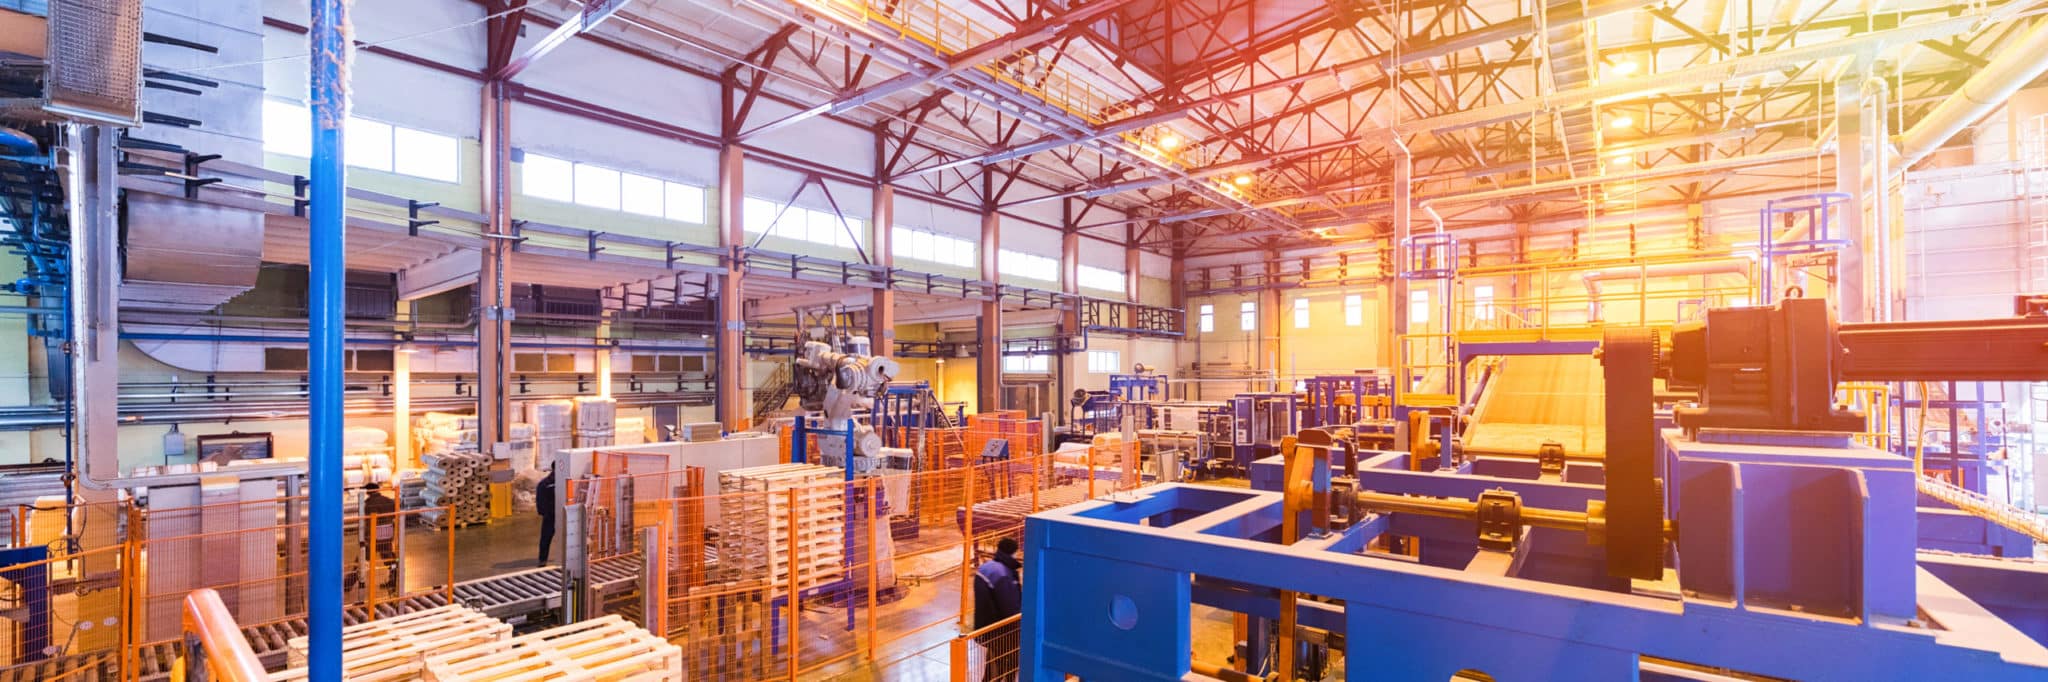 how to start a manufacturing business - manufacturing equipment